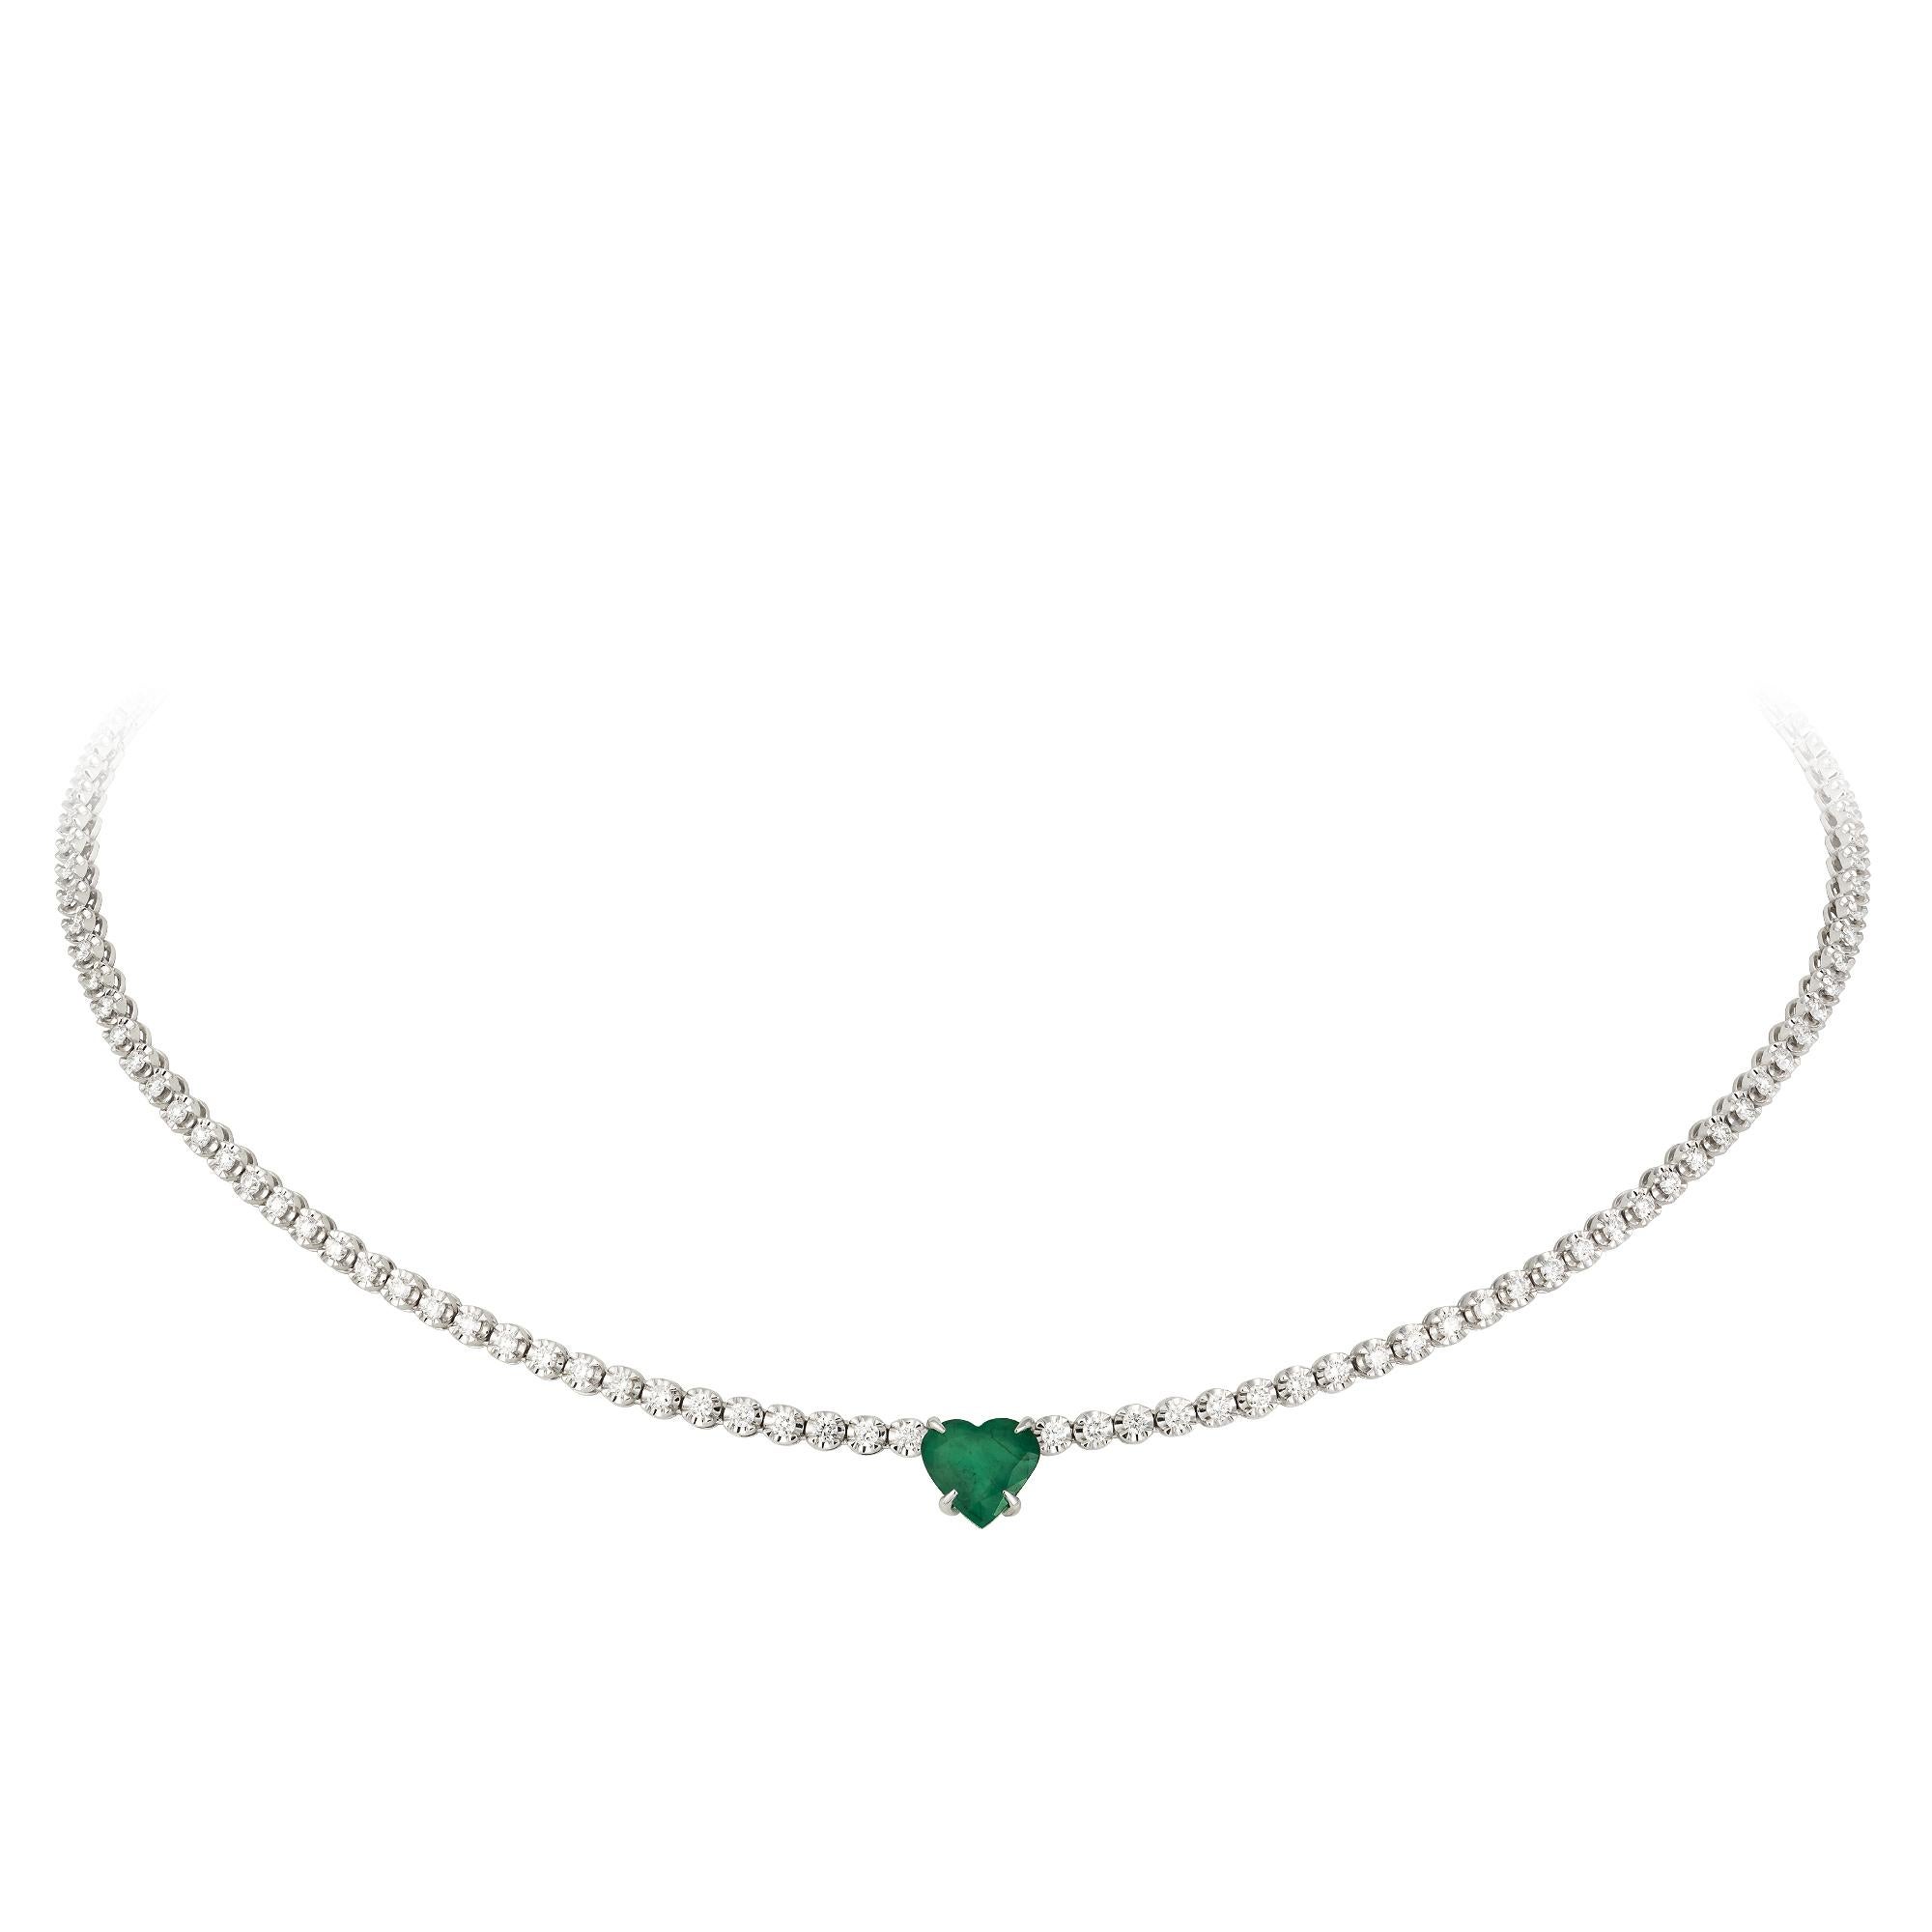 NECKLACE 18K White Gold 
Diamond 2.10 Cts/149 Pcs 
Emerald 2.47 Cts/1 Pcs

With a heritage of ancient fine Swiss jewelry traditions, NATKINA is a Geneva based jewellery brand, which creates modern jewellery masterpieces suitable for every day